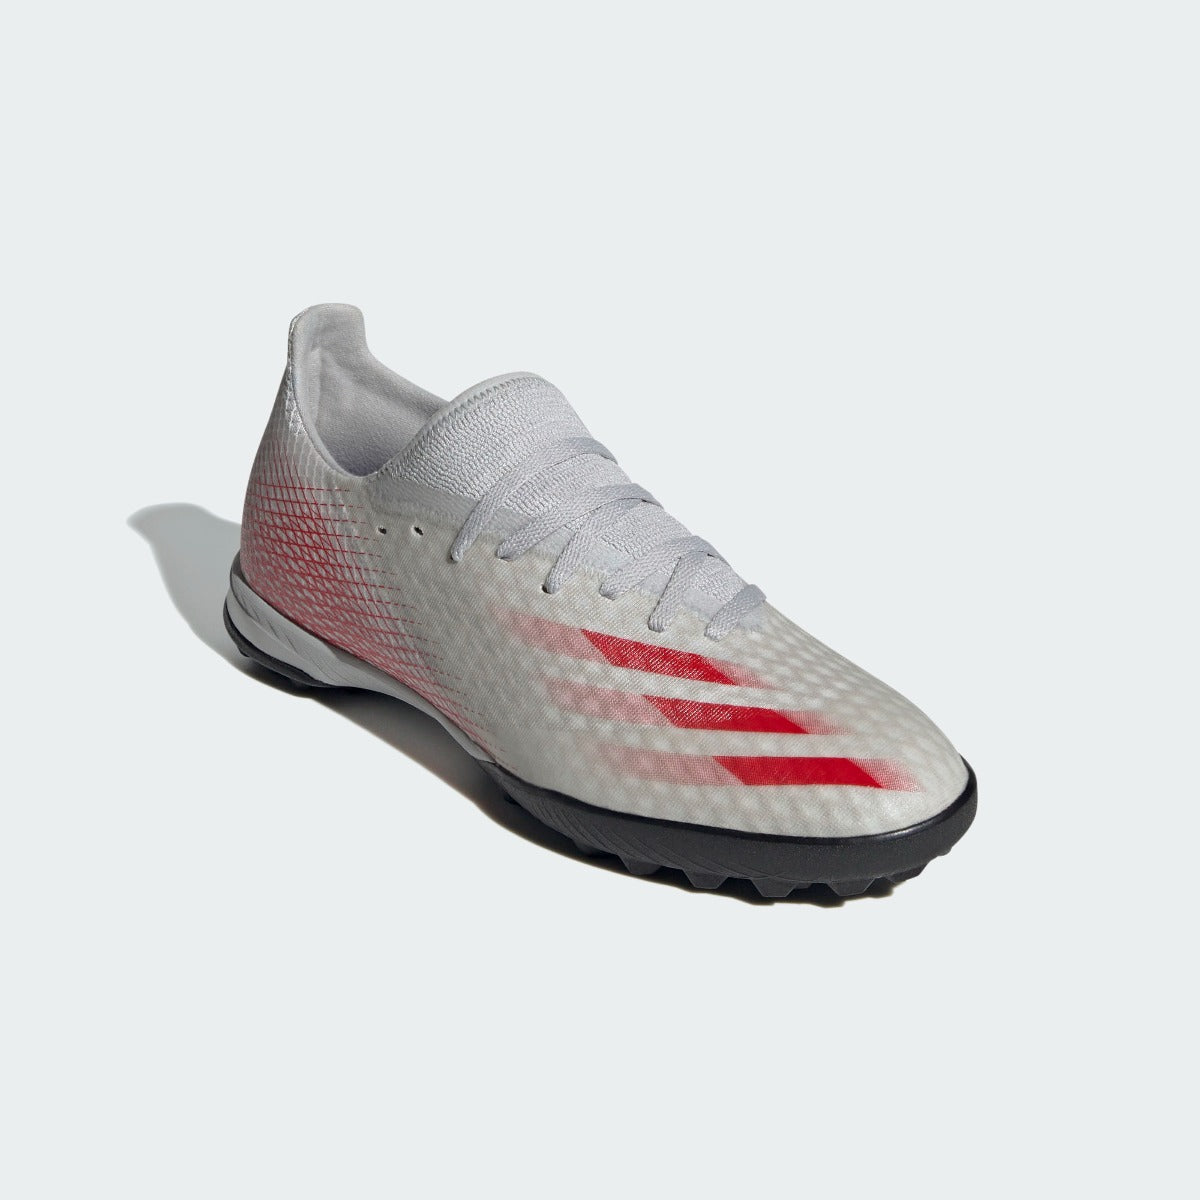 Adidas X Ghosted .3 TF - Grey-Red (Diagonal 1)